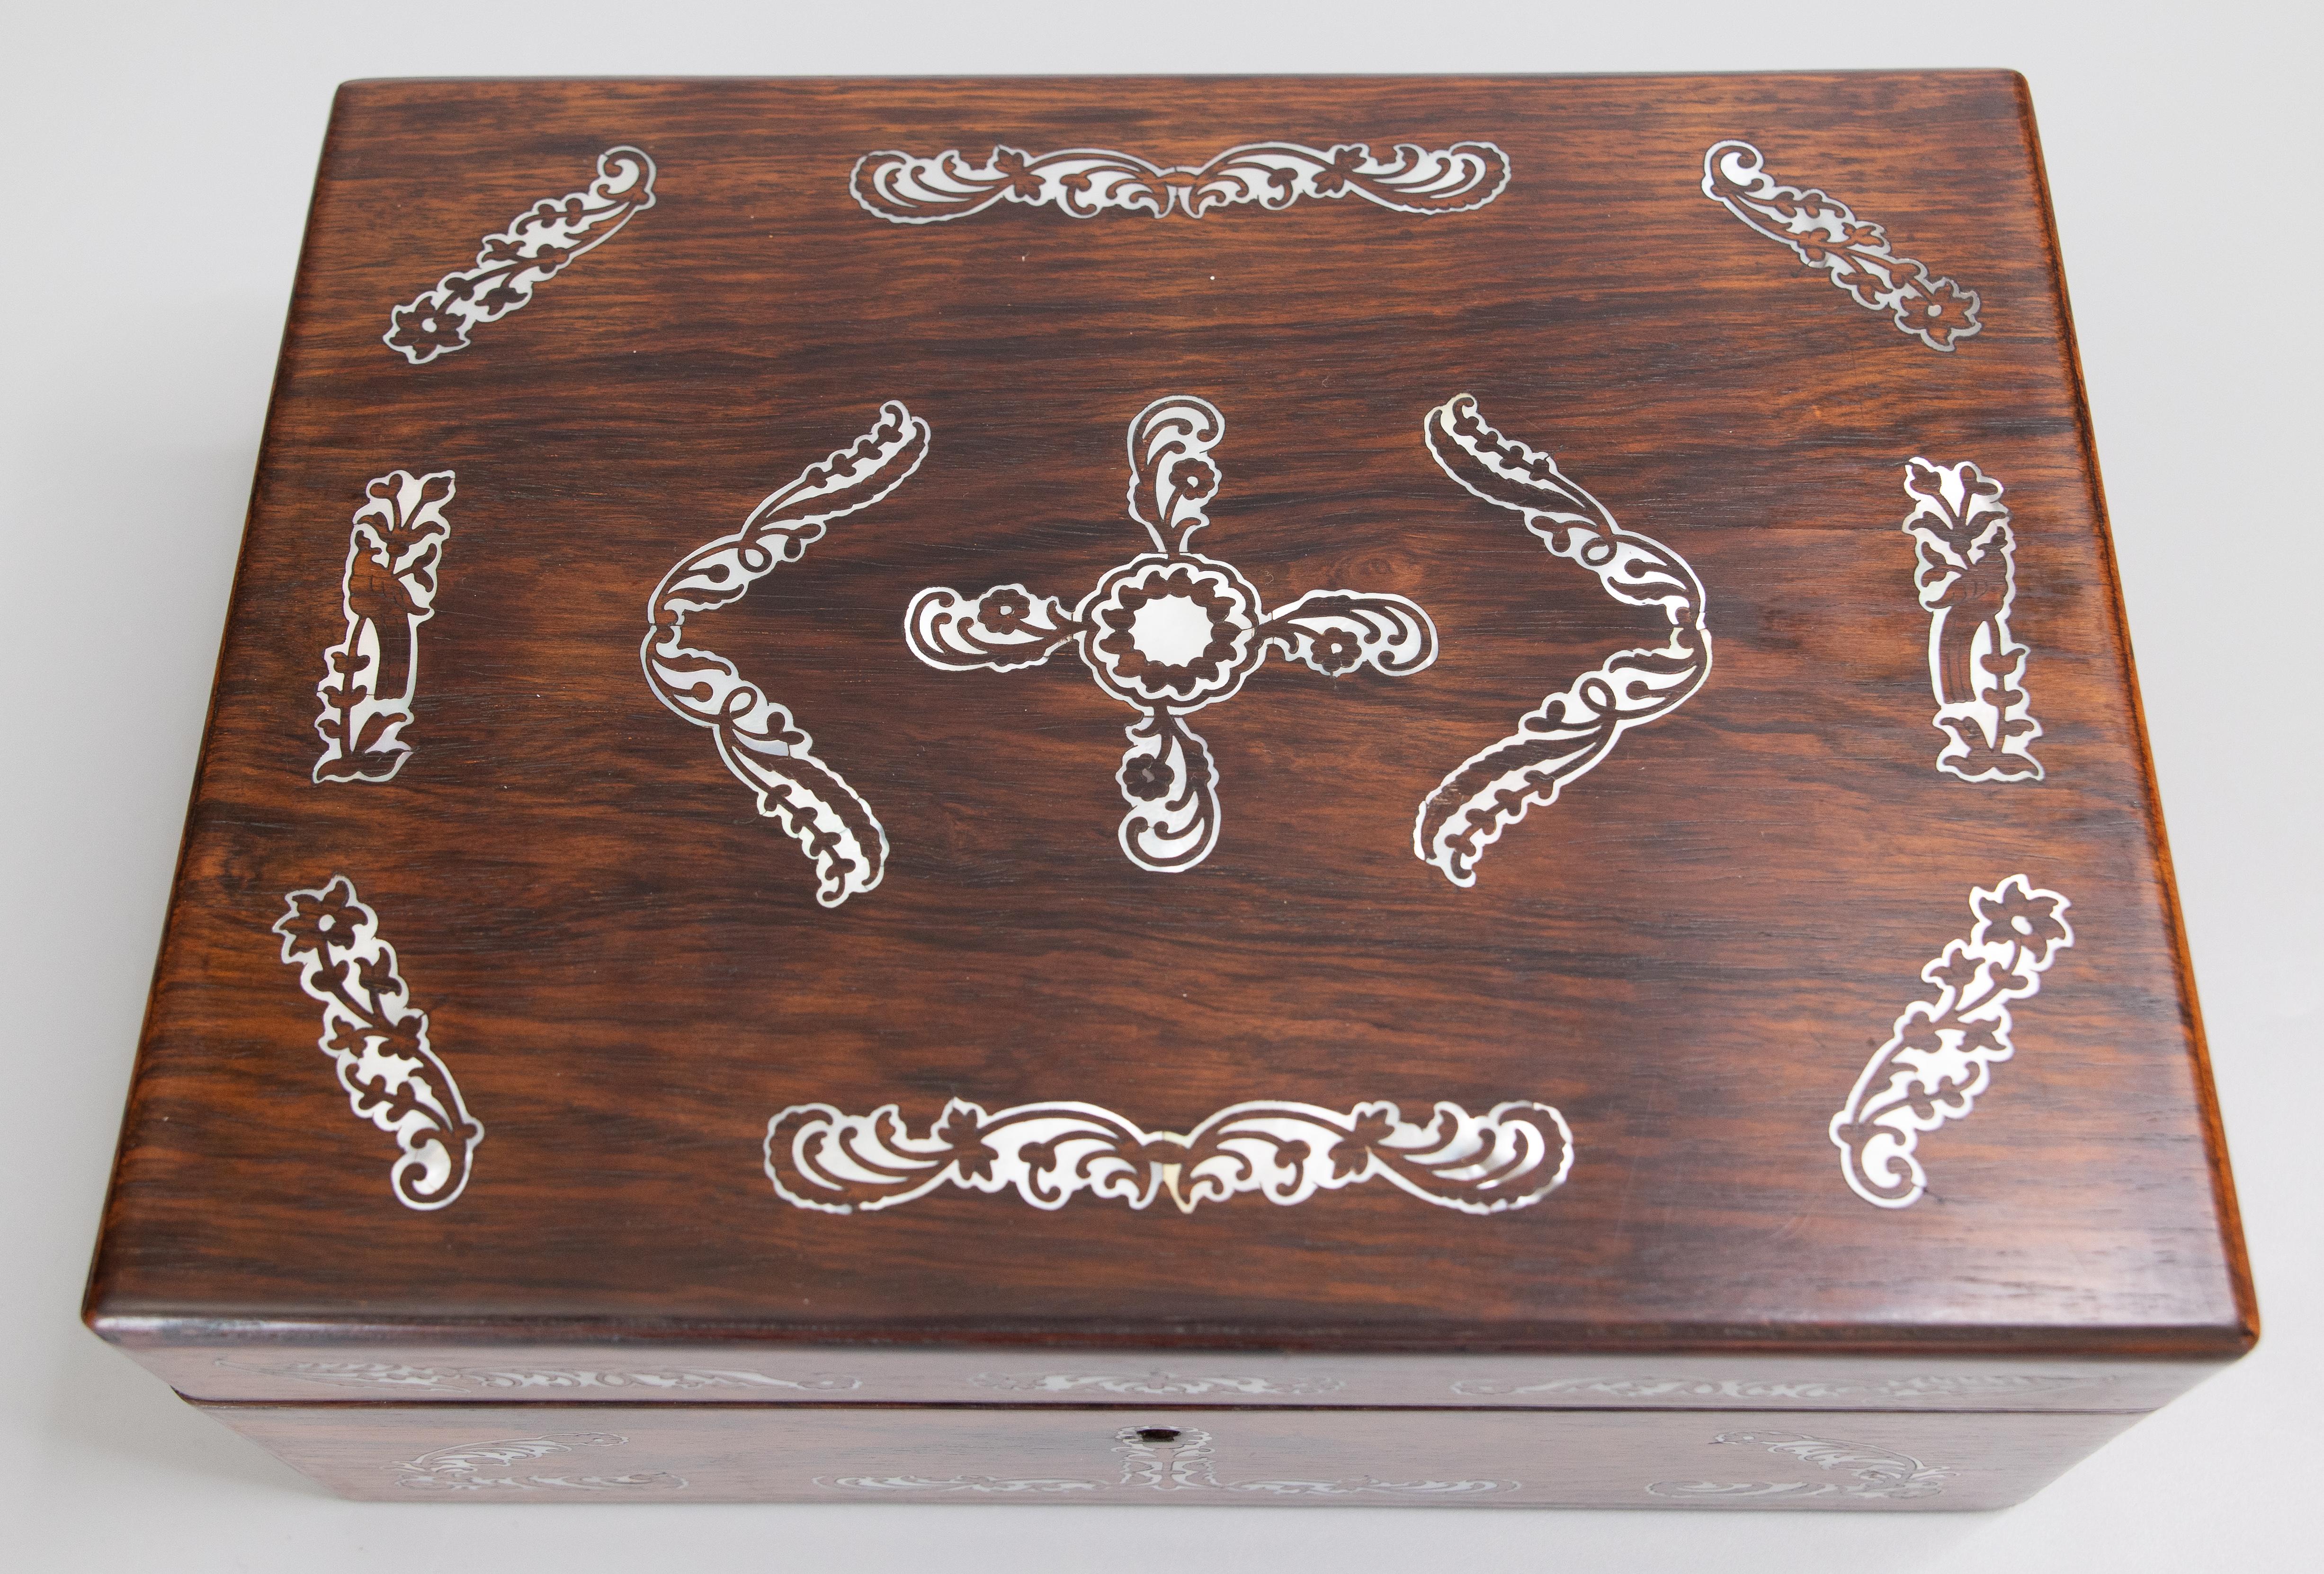 19th Century English Rosewood & Mother of Pearl Jewelry Box In Good Condition For Sale In Pearland, TX